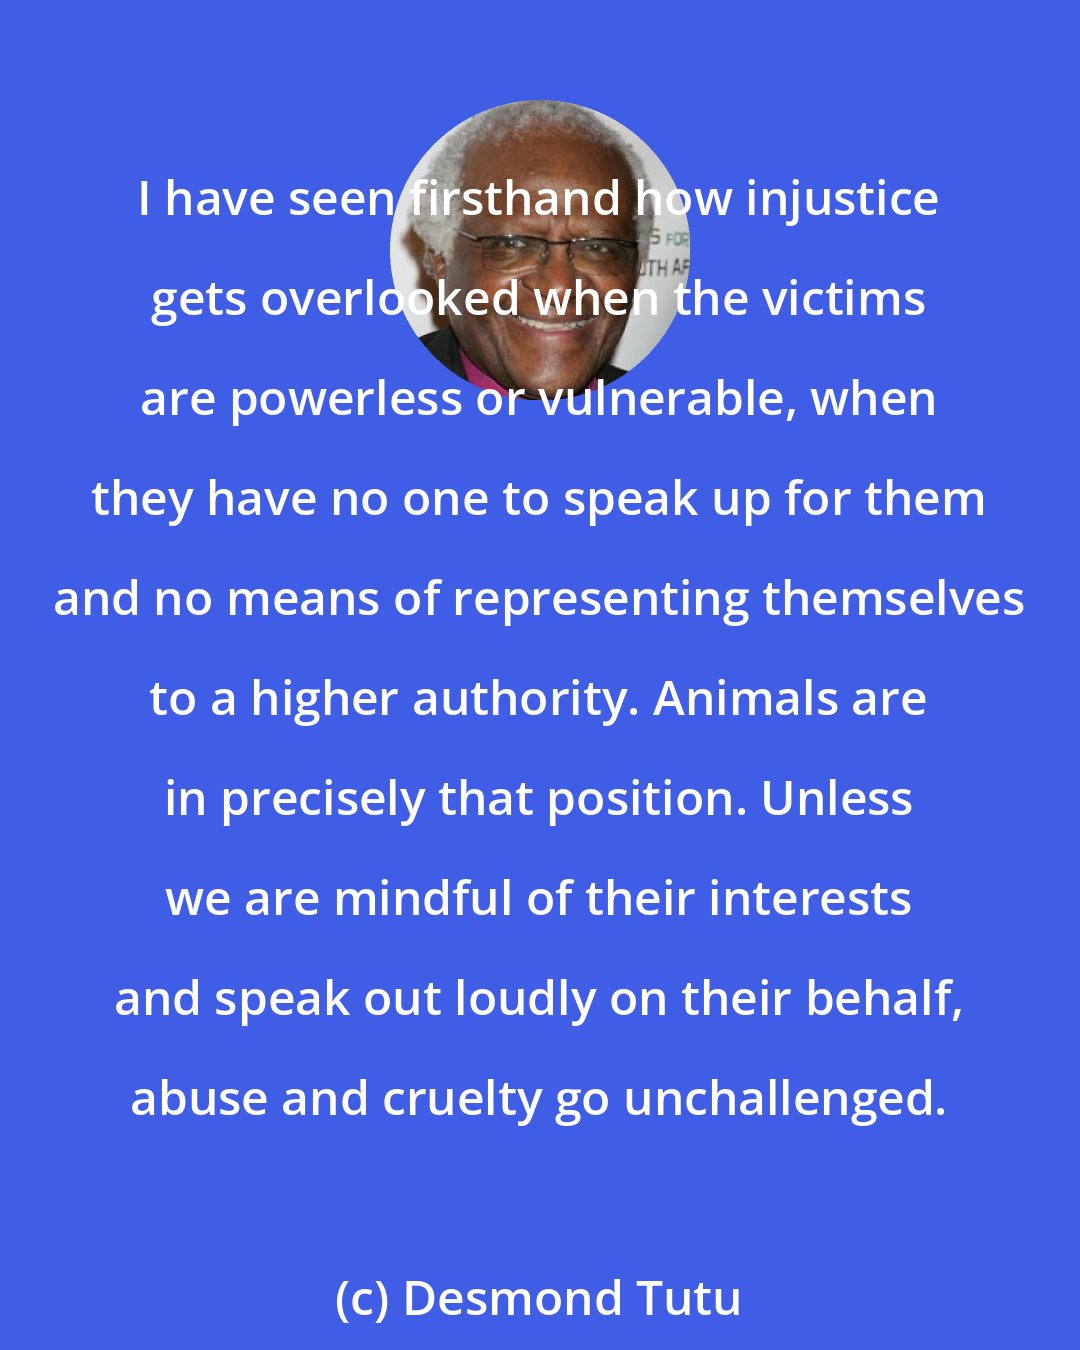 Desmond Tutu: I have seen firsthand how injustice gets overlooked when the victims are powerless or vulnerable, when they have no one to speak up for them and no means of representing themselves to a higher authority. Animals are in precisely that position. Unless we are mindful of their interests and speak out loudly on their behalf, abuse and cruelty go unchallenged.